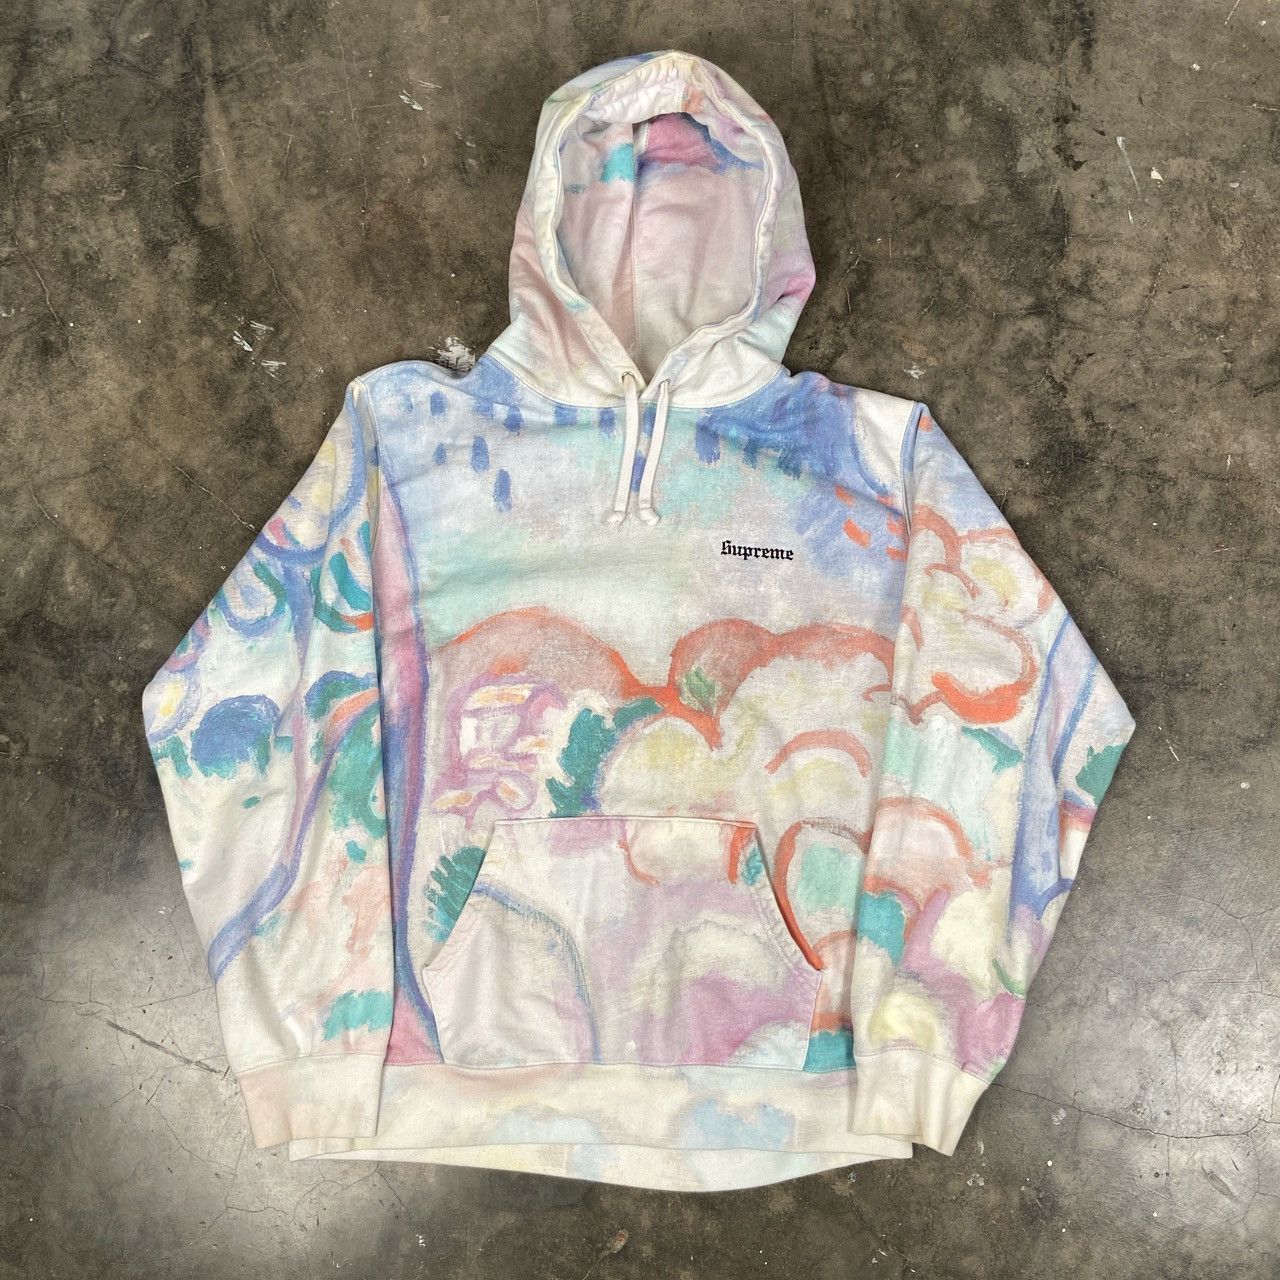 PRE-OWNED Supreme Landscape Hoodie Large (L) S/S 2018